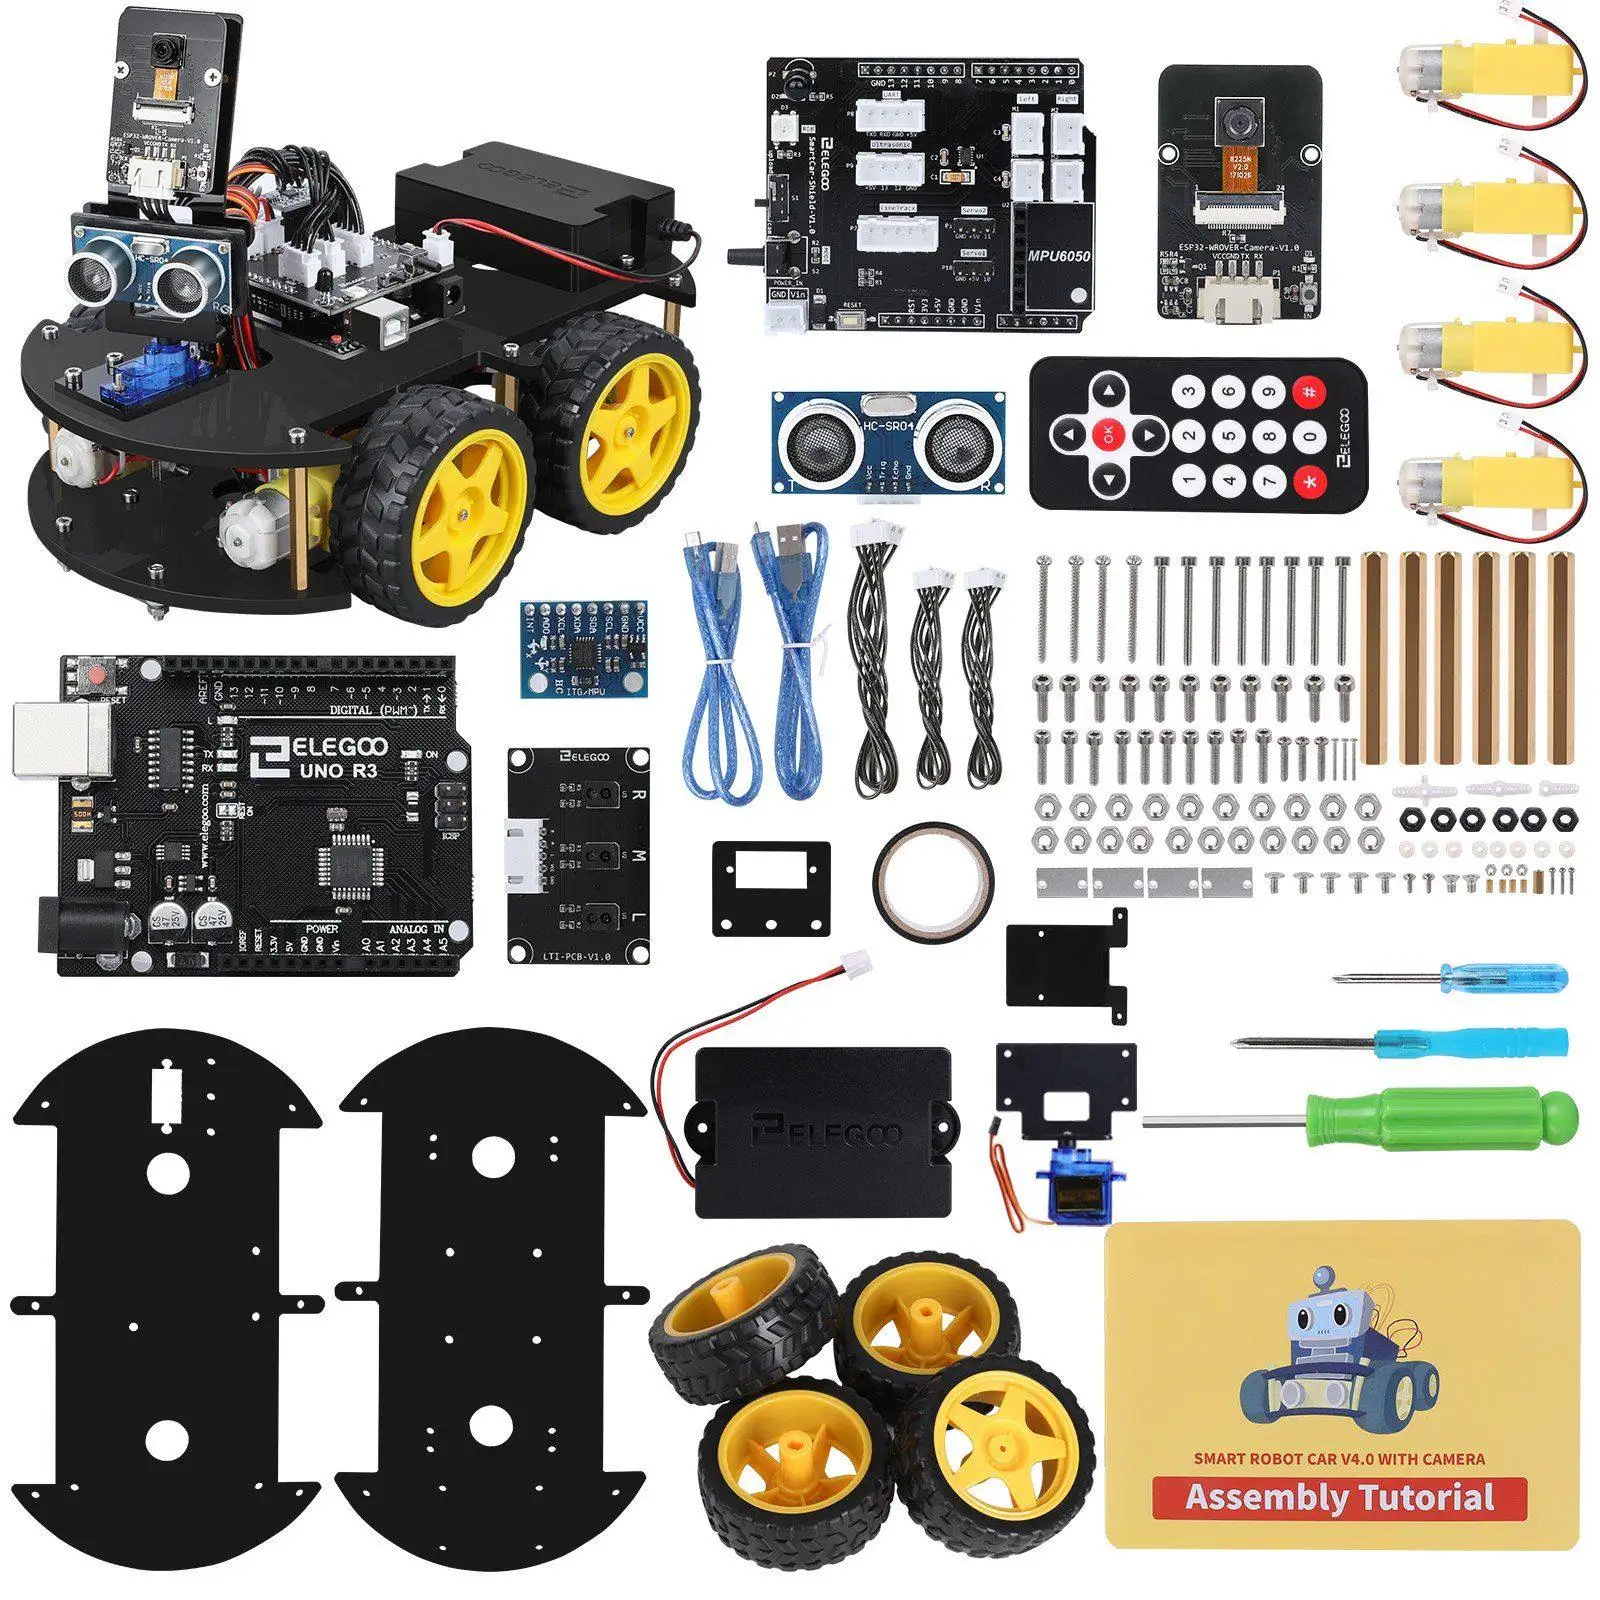  ELEGOO UNO R3 Project Most Complete Starter Kit with Tutorial  Compatible with Arduino IDE (63 Items) : Electronics